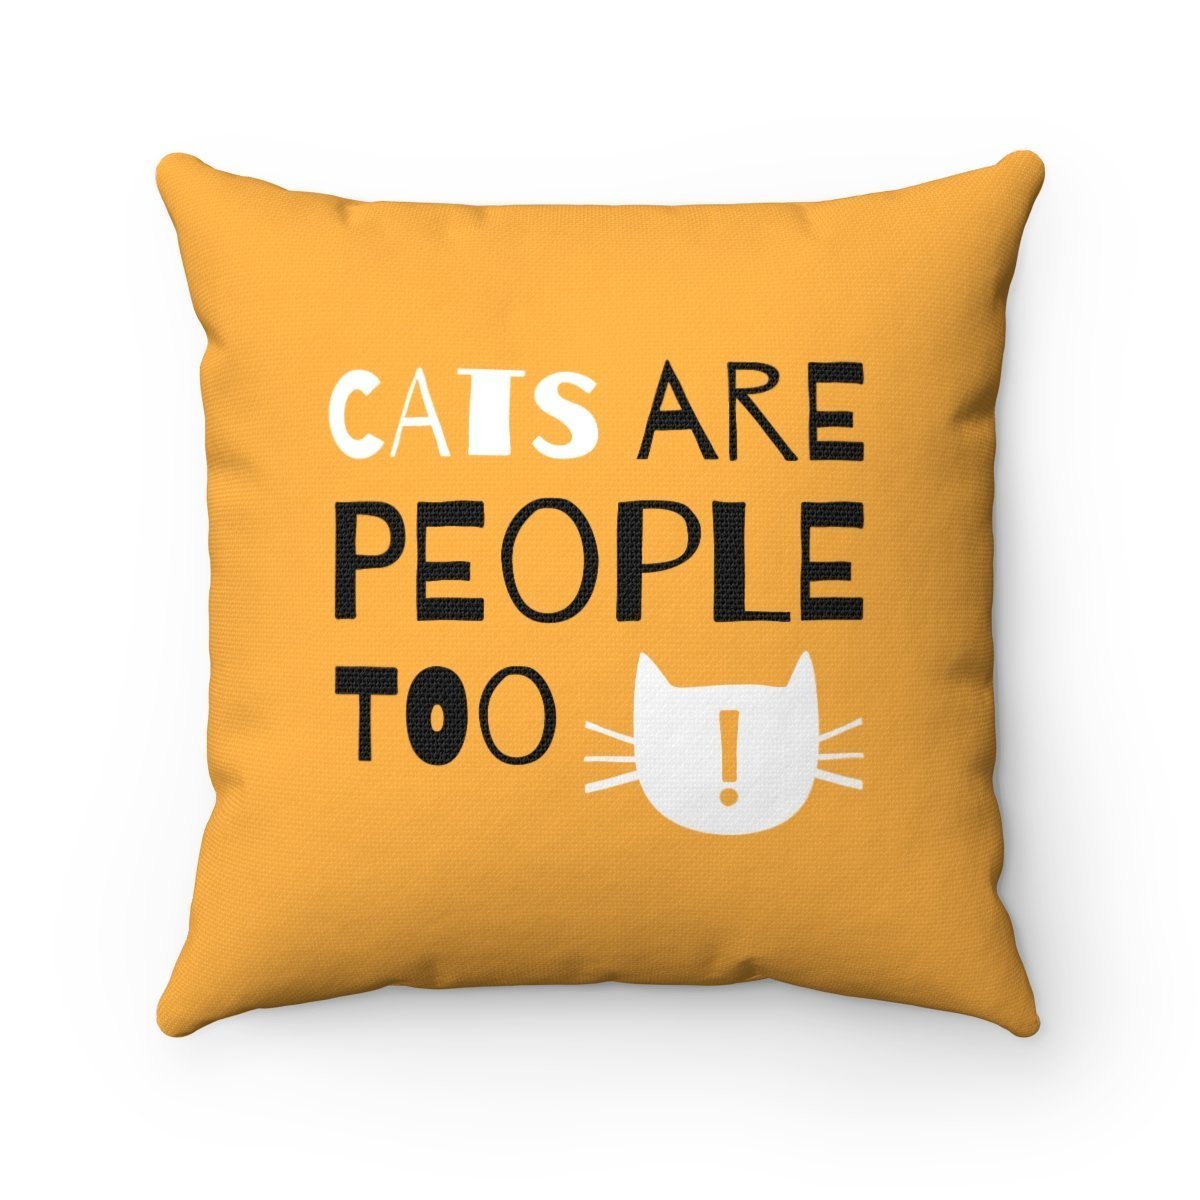 Funny cat pillow featuring the print "Cats Are People Too" on a bright yellow background